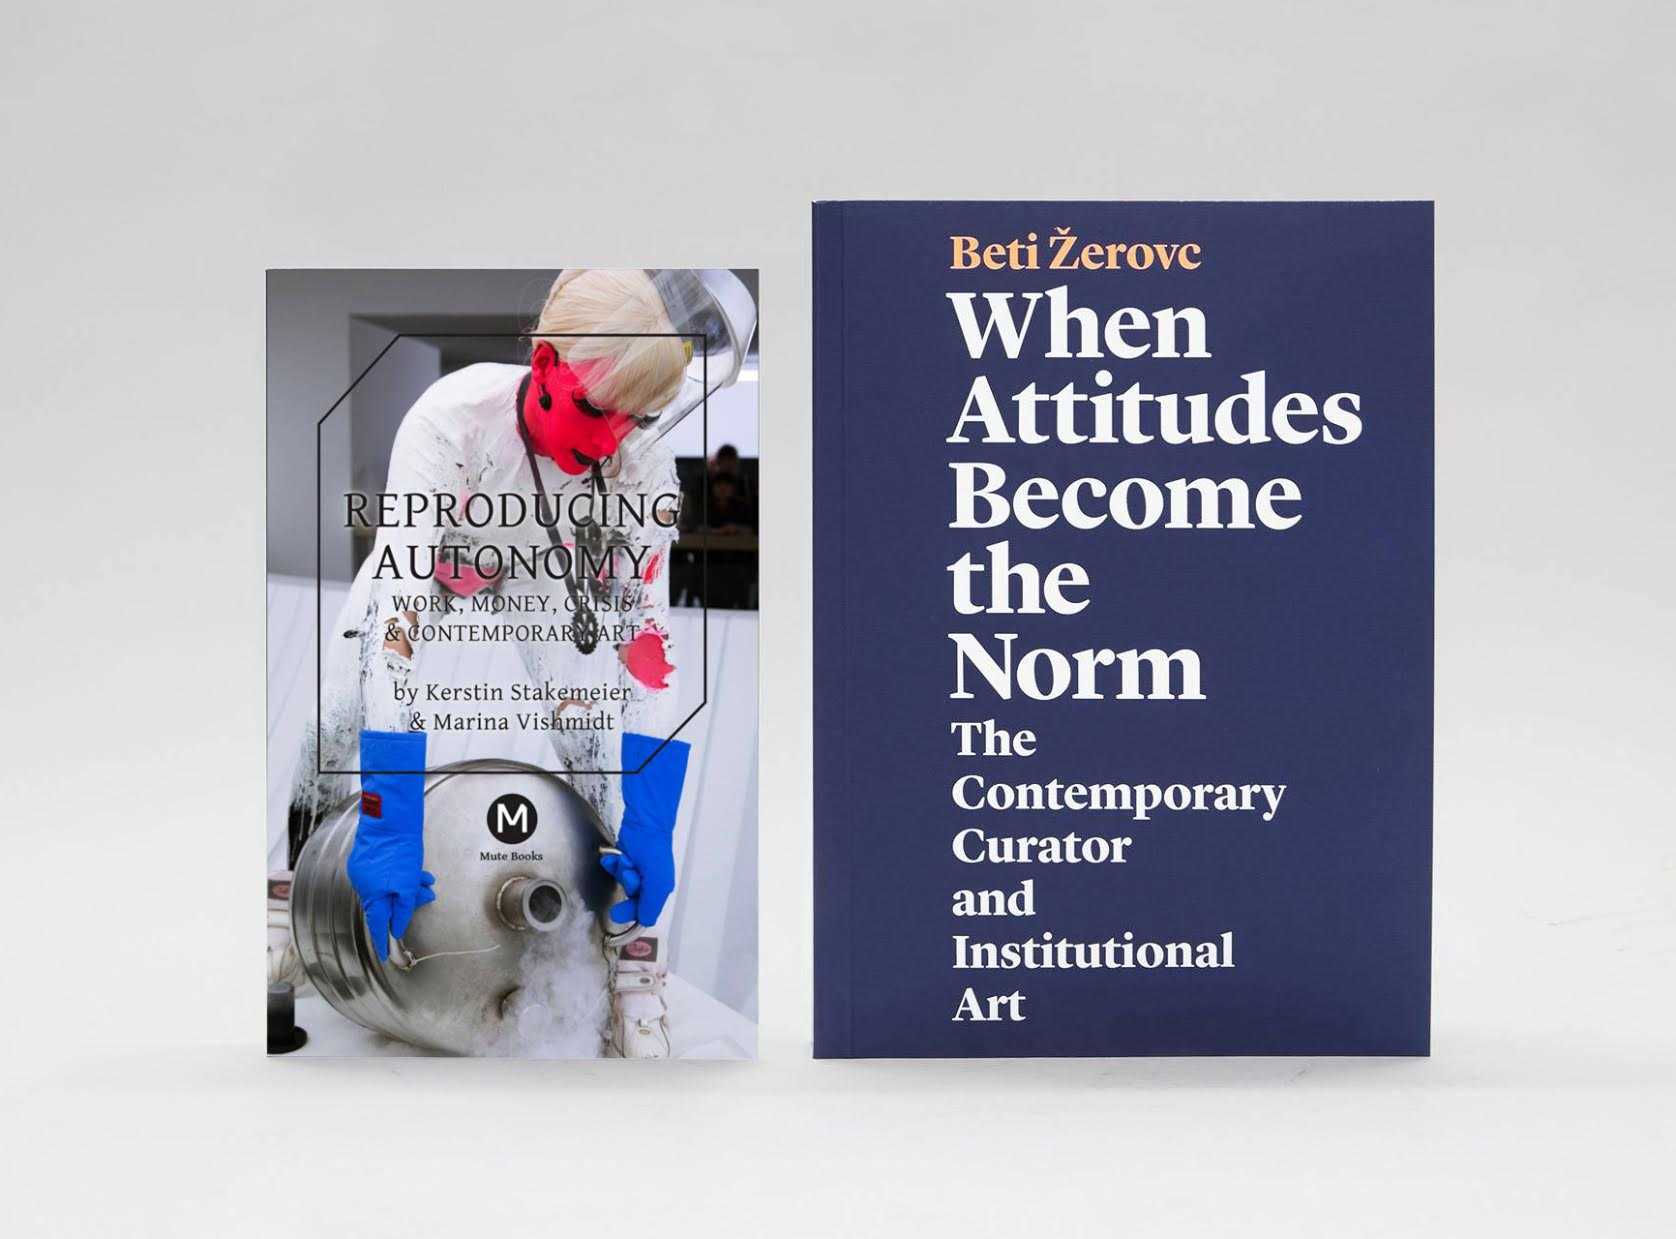 Reproducing Autonomy: Work, Money, Crisis, And Contemporary Art  by Kerstin Stakemeier and Marina Vishmidt  and  When Attitudes Become the Norm by Beti Žerovc 